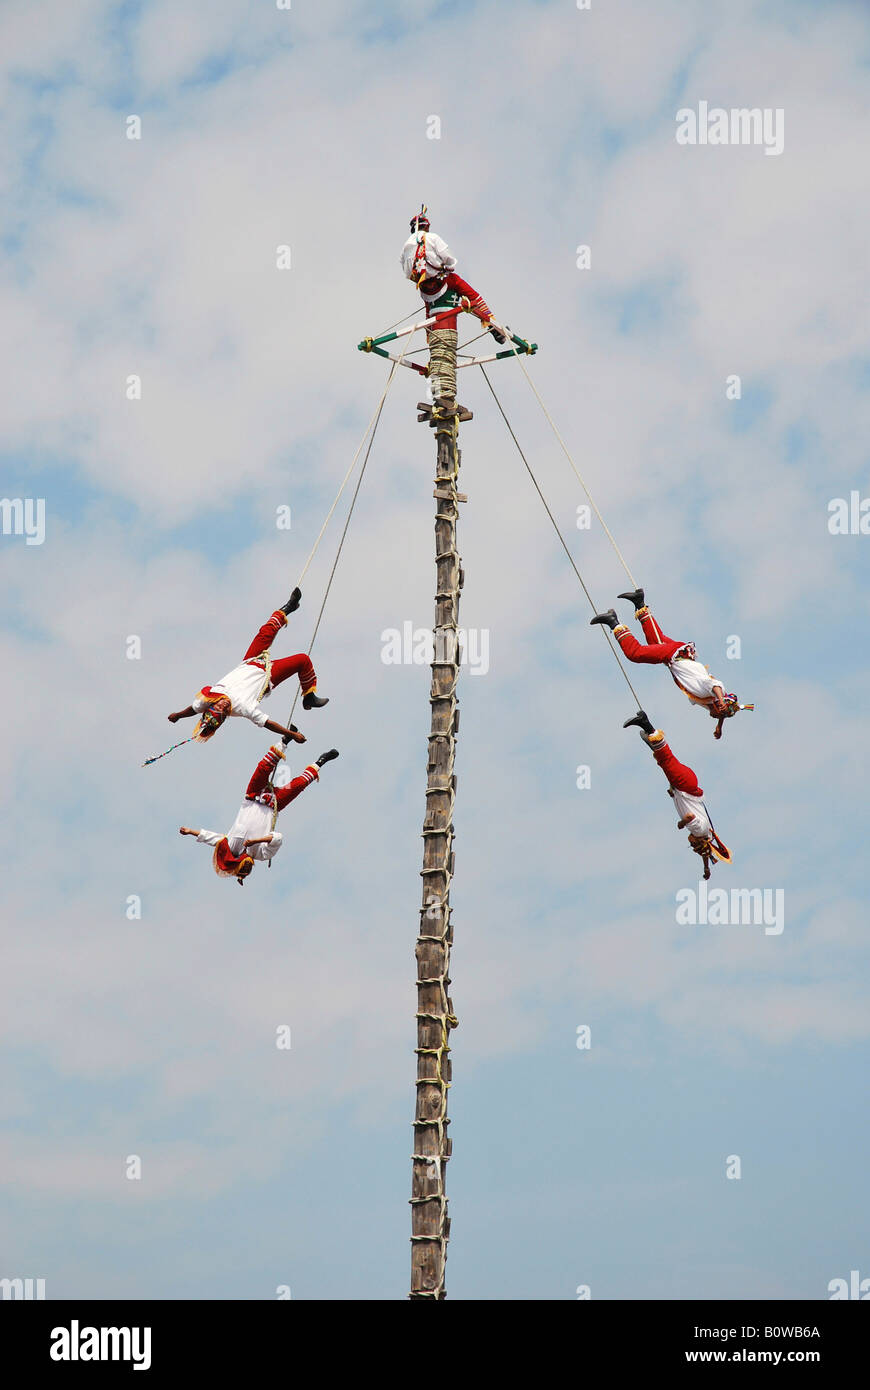 Voladores, flying dancers, flyers, Teotihuacan, Mexico, North America Stock Photo